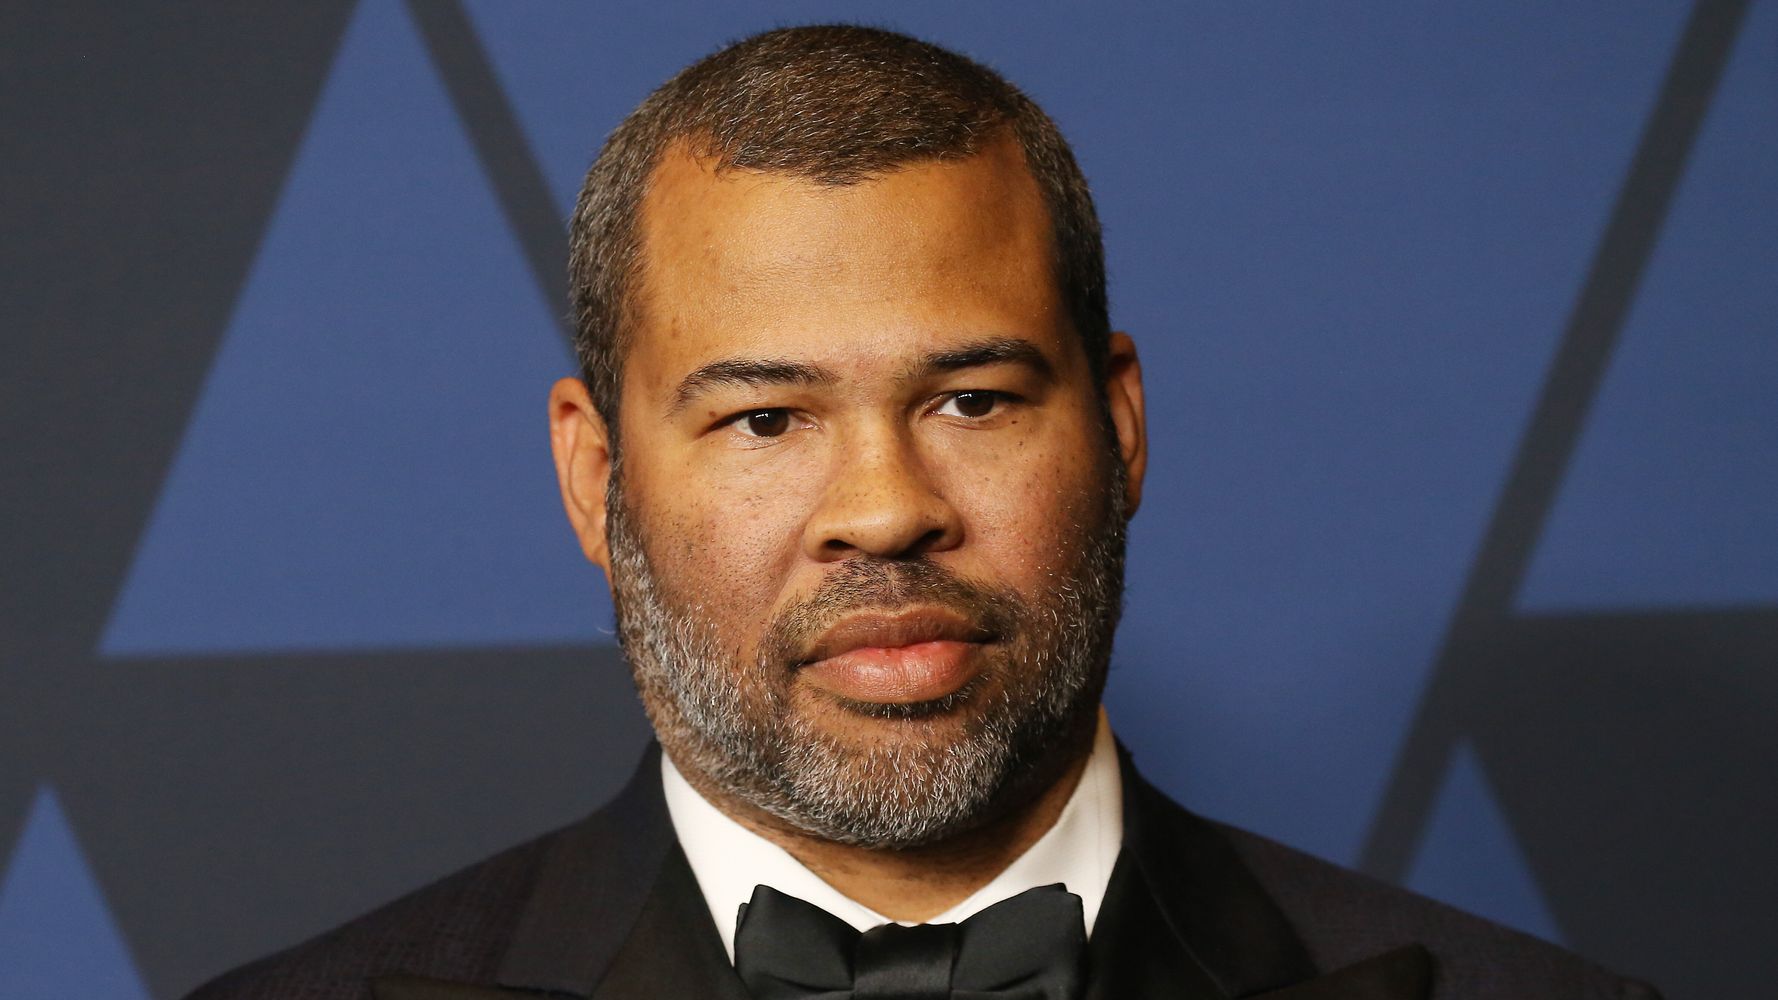 Jordan Peele Drops Poster For His New Horror Film, Which Has The Perfect Title